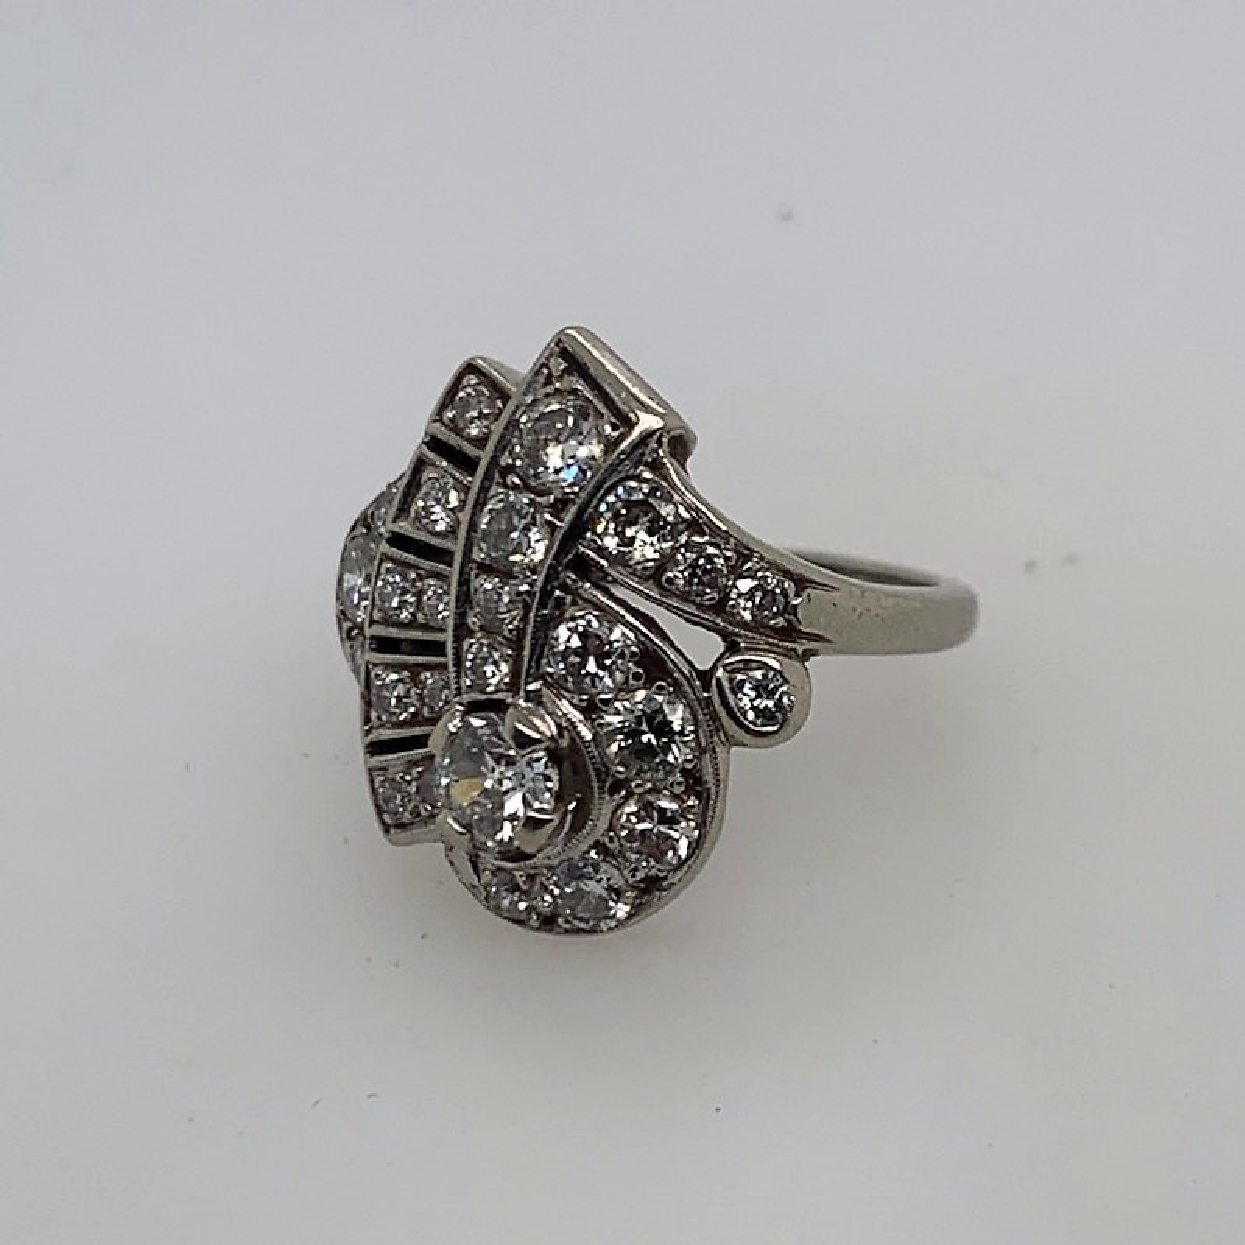 1940 s Retro 14K White Gold and Diamond Cocktail Ring; Size 7.25
1.4CTTW; K-L Color/SI1 Clarity